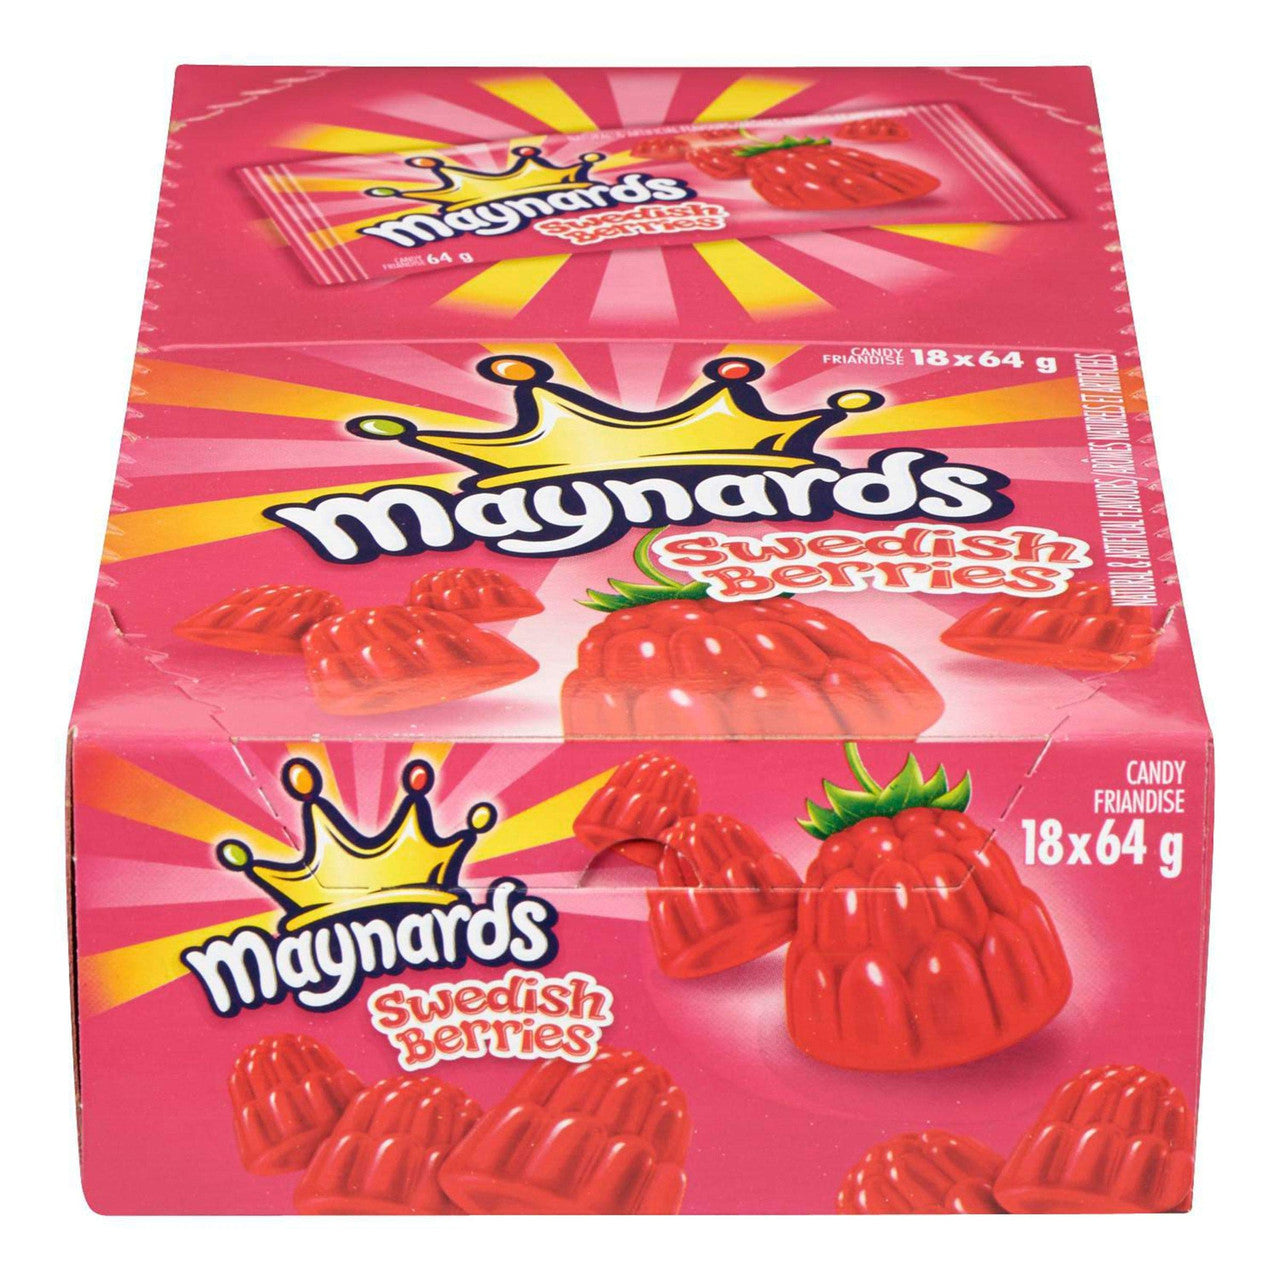 Maynards Swedish Berries Gummy Candy, 64g/2.2oz., 18 Pack {Imported from Canada}